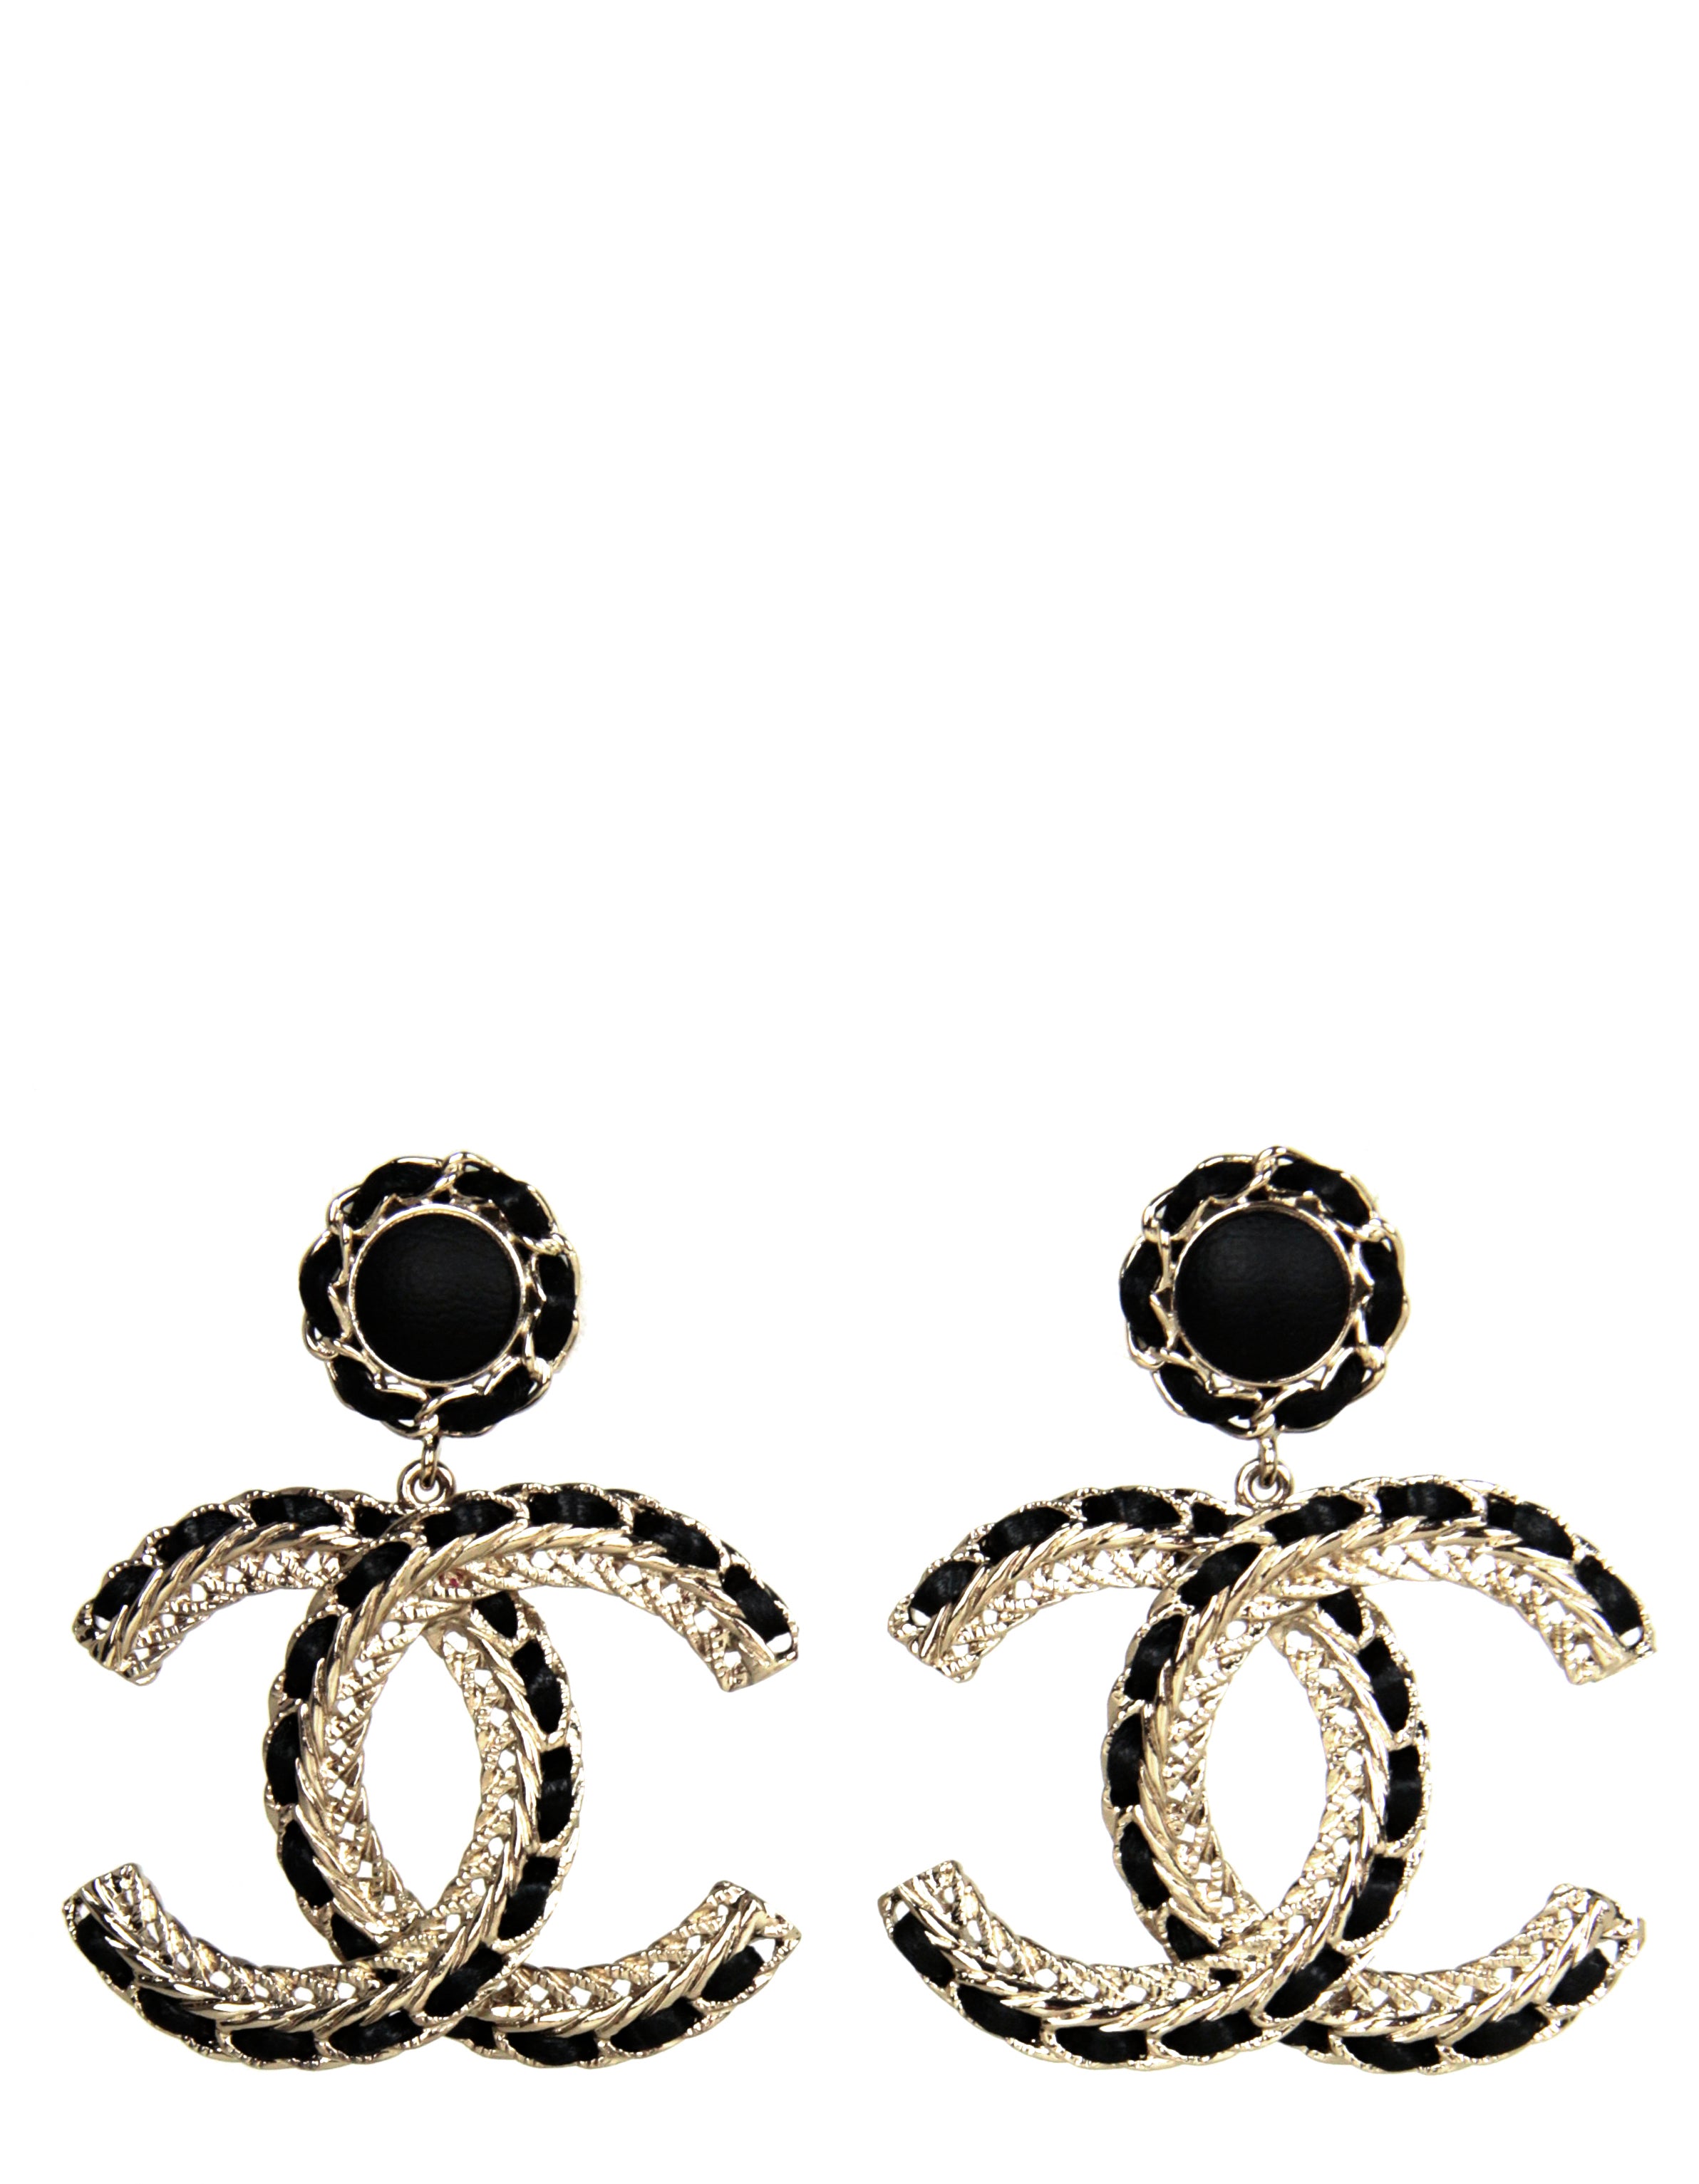 VINTAGE CHANEL LONG COIN DANGLING EARRINGS WITH CC